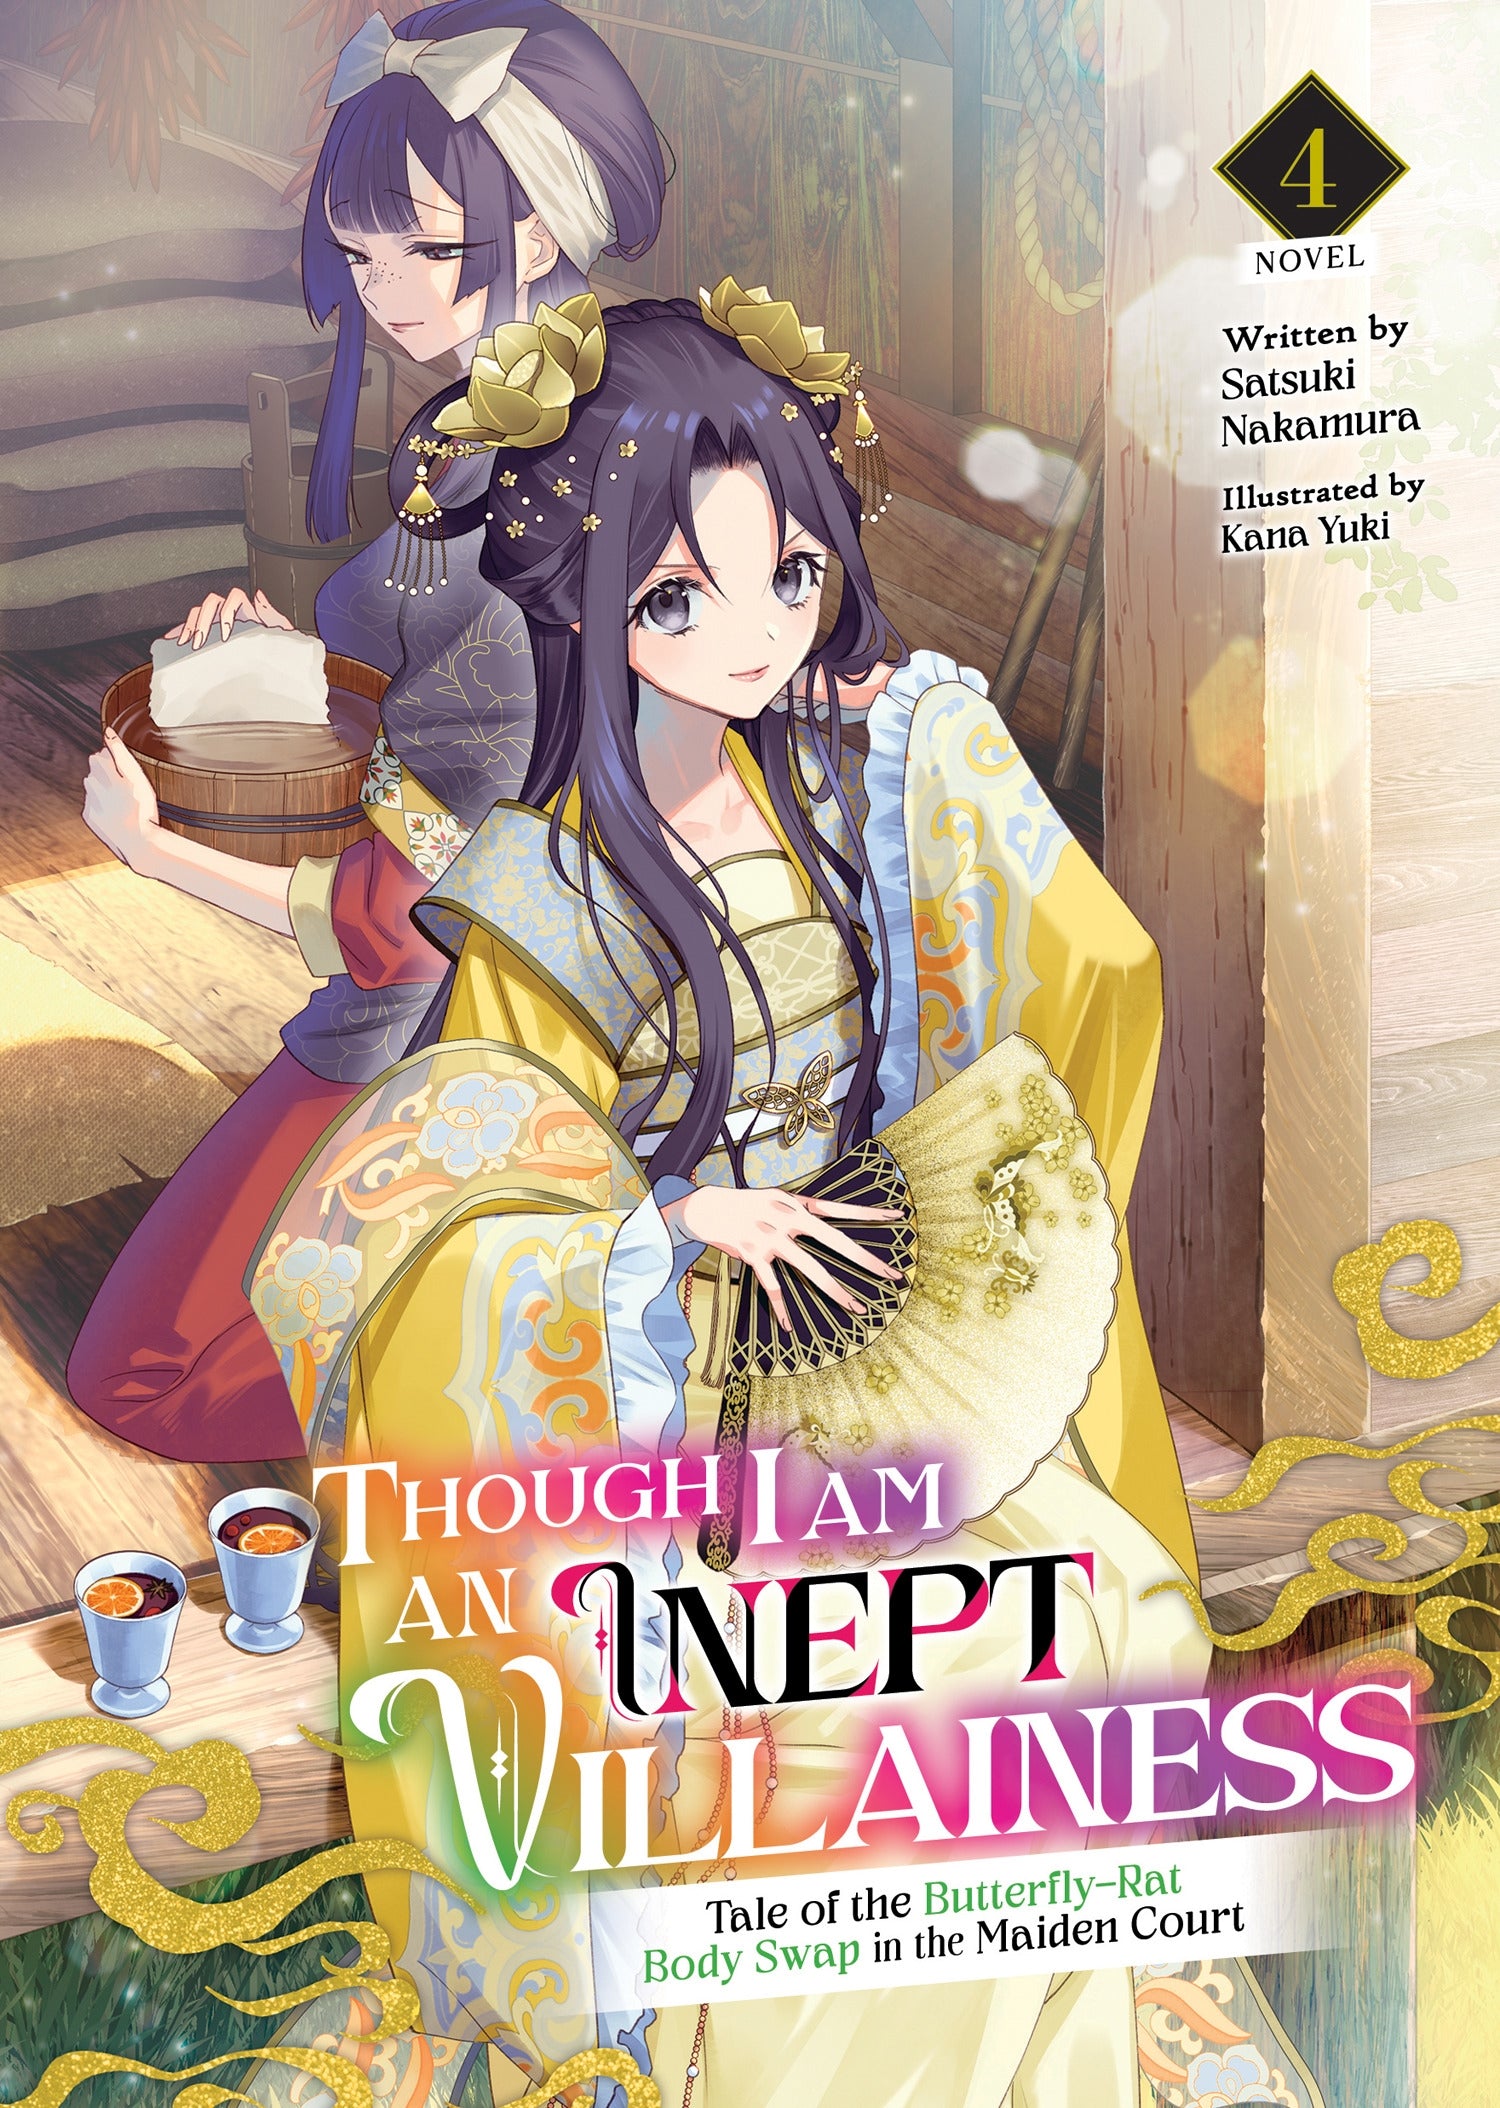 Though I Am an Inept Villainess Tale of the Butterfly-Rat Body Swap in the Maiden Court (Light Novel) Vol. 4